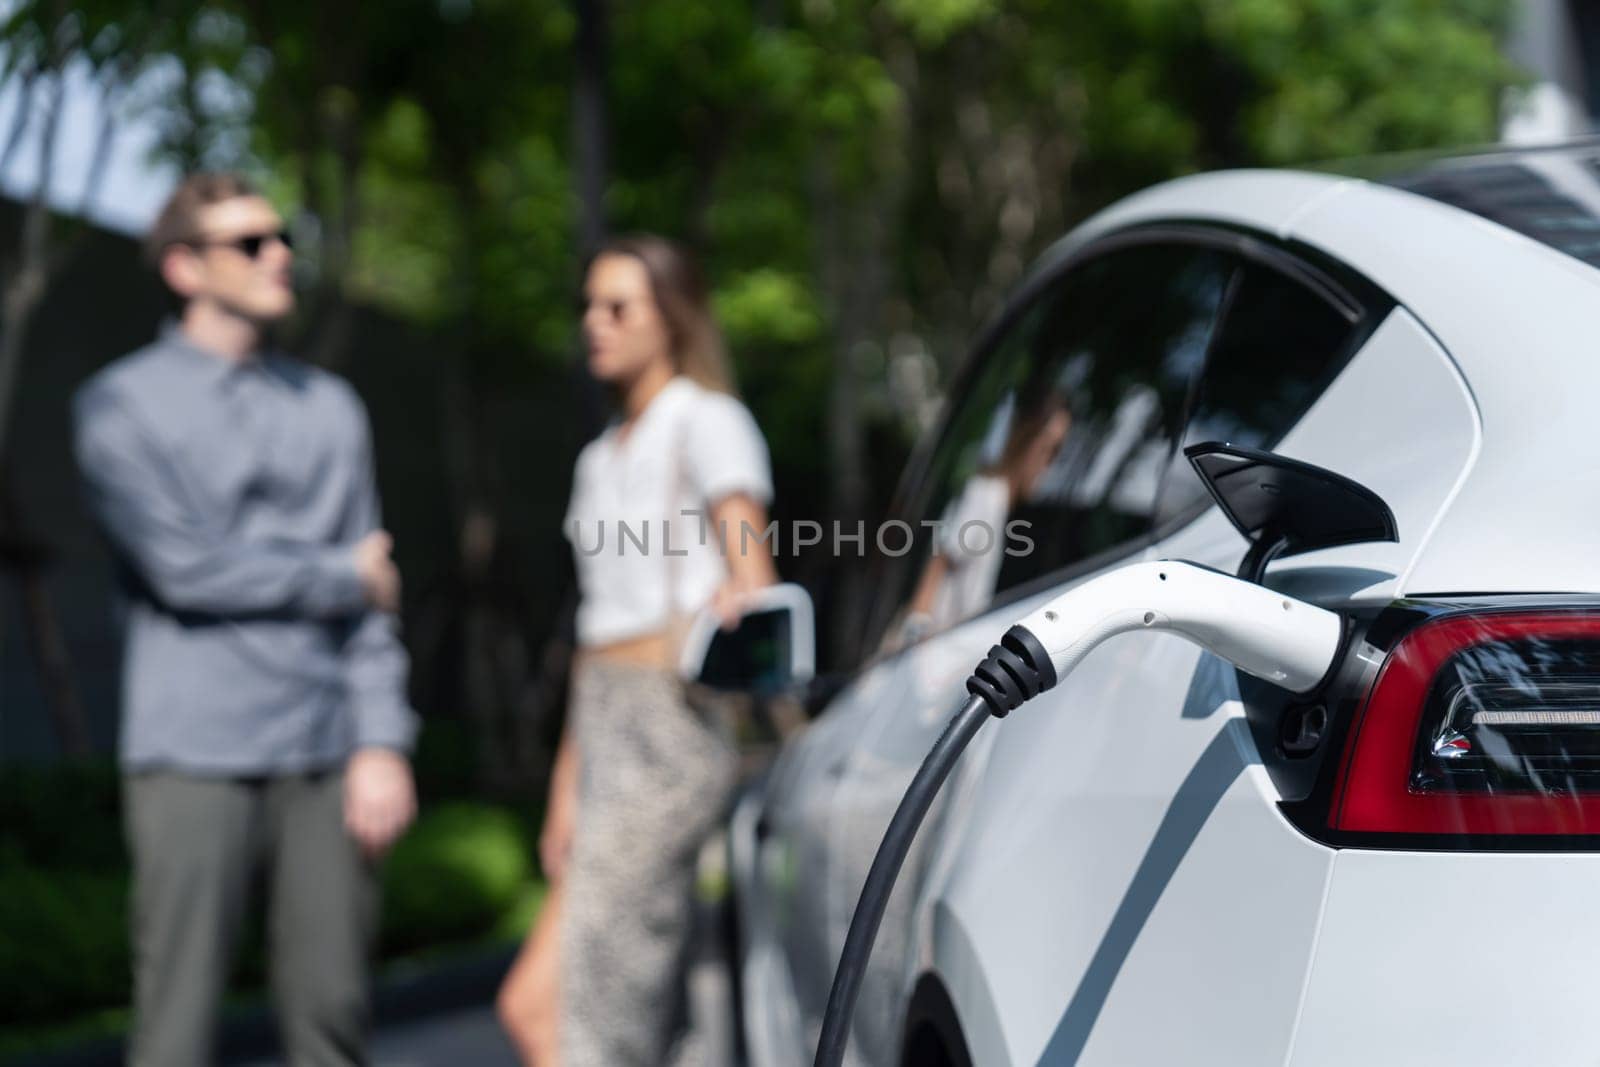 Young couple travel with EV electric car charging in green sustainable city outdoor garden in summer shows urban sustainability lifestyle by green clean rechargeable energy of electric vehicle innards